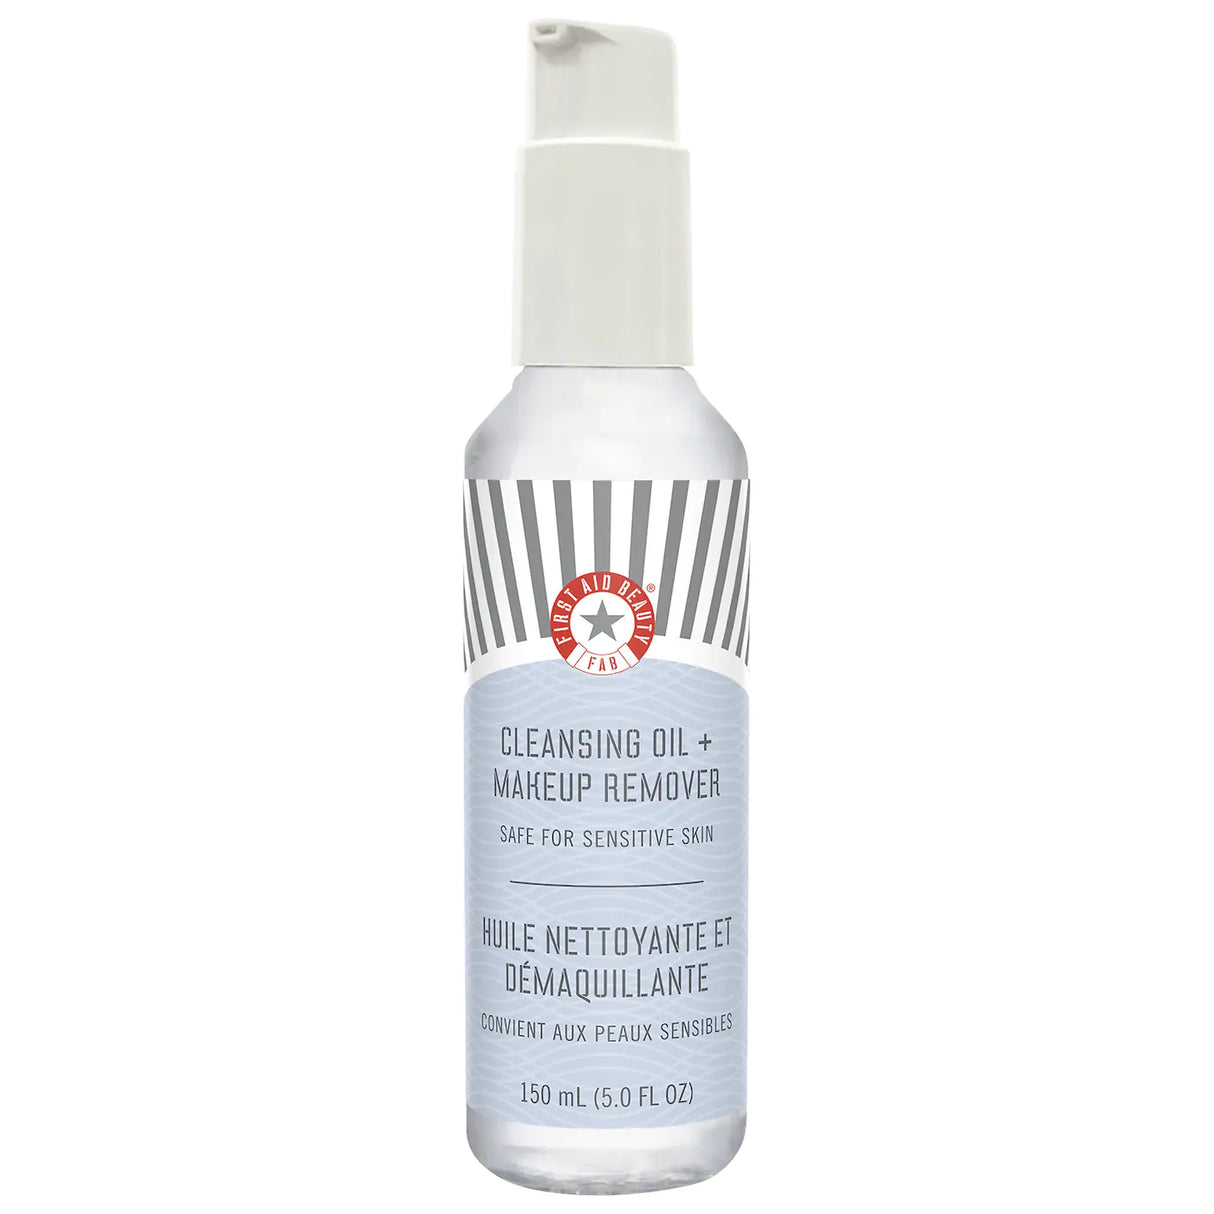 First Aid Beauty 2-in-1 Cleansing Oil + Makeup Remover (5.0 oz.)